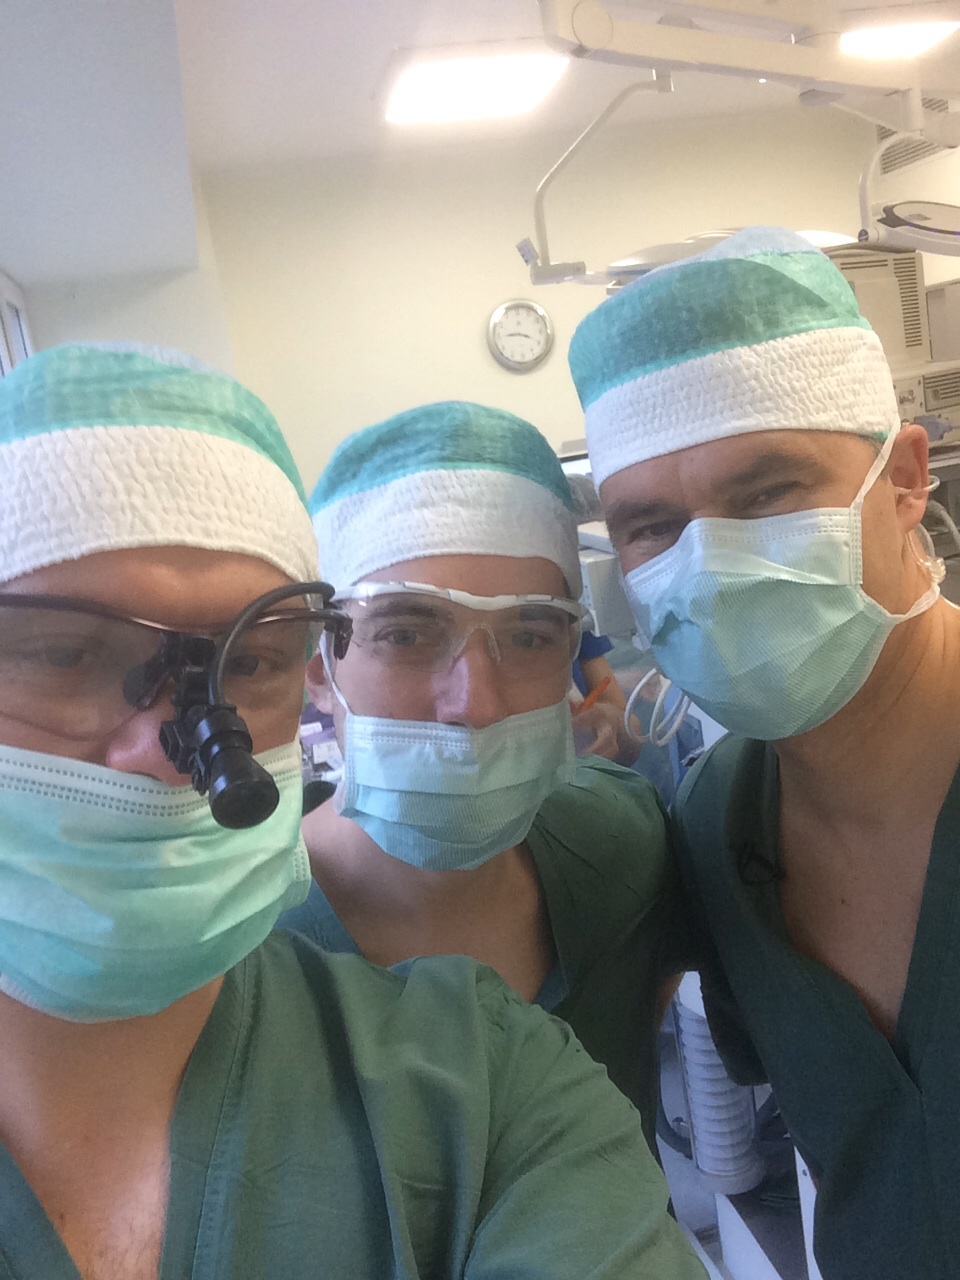 Dr. Senyuk, Dr. Antipov, and Dr. Salms on surgery day in Riga